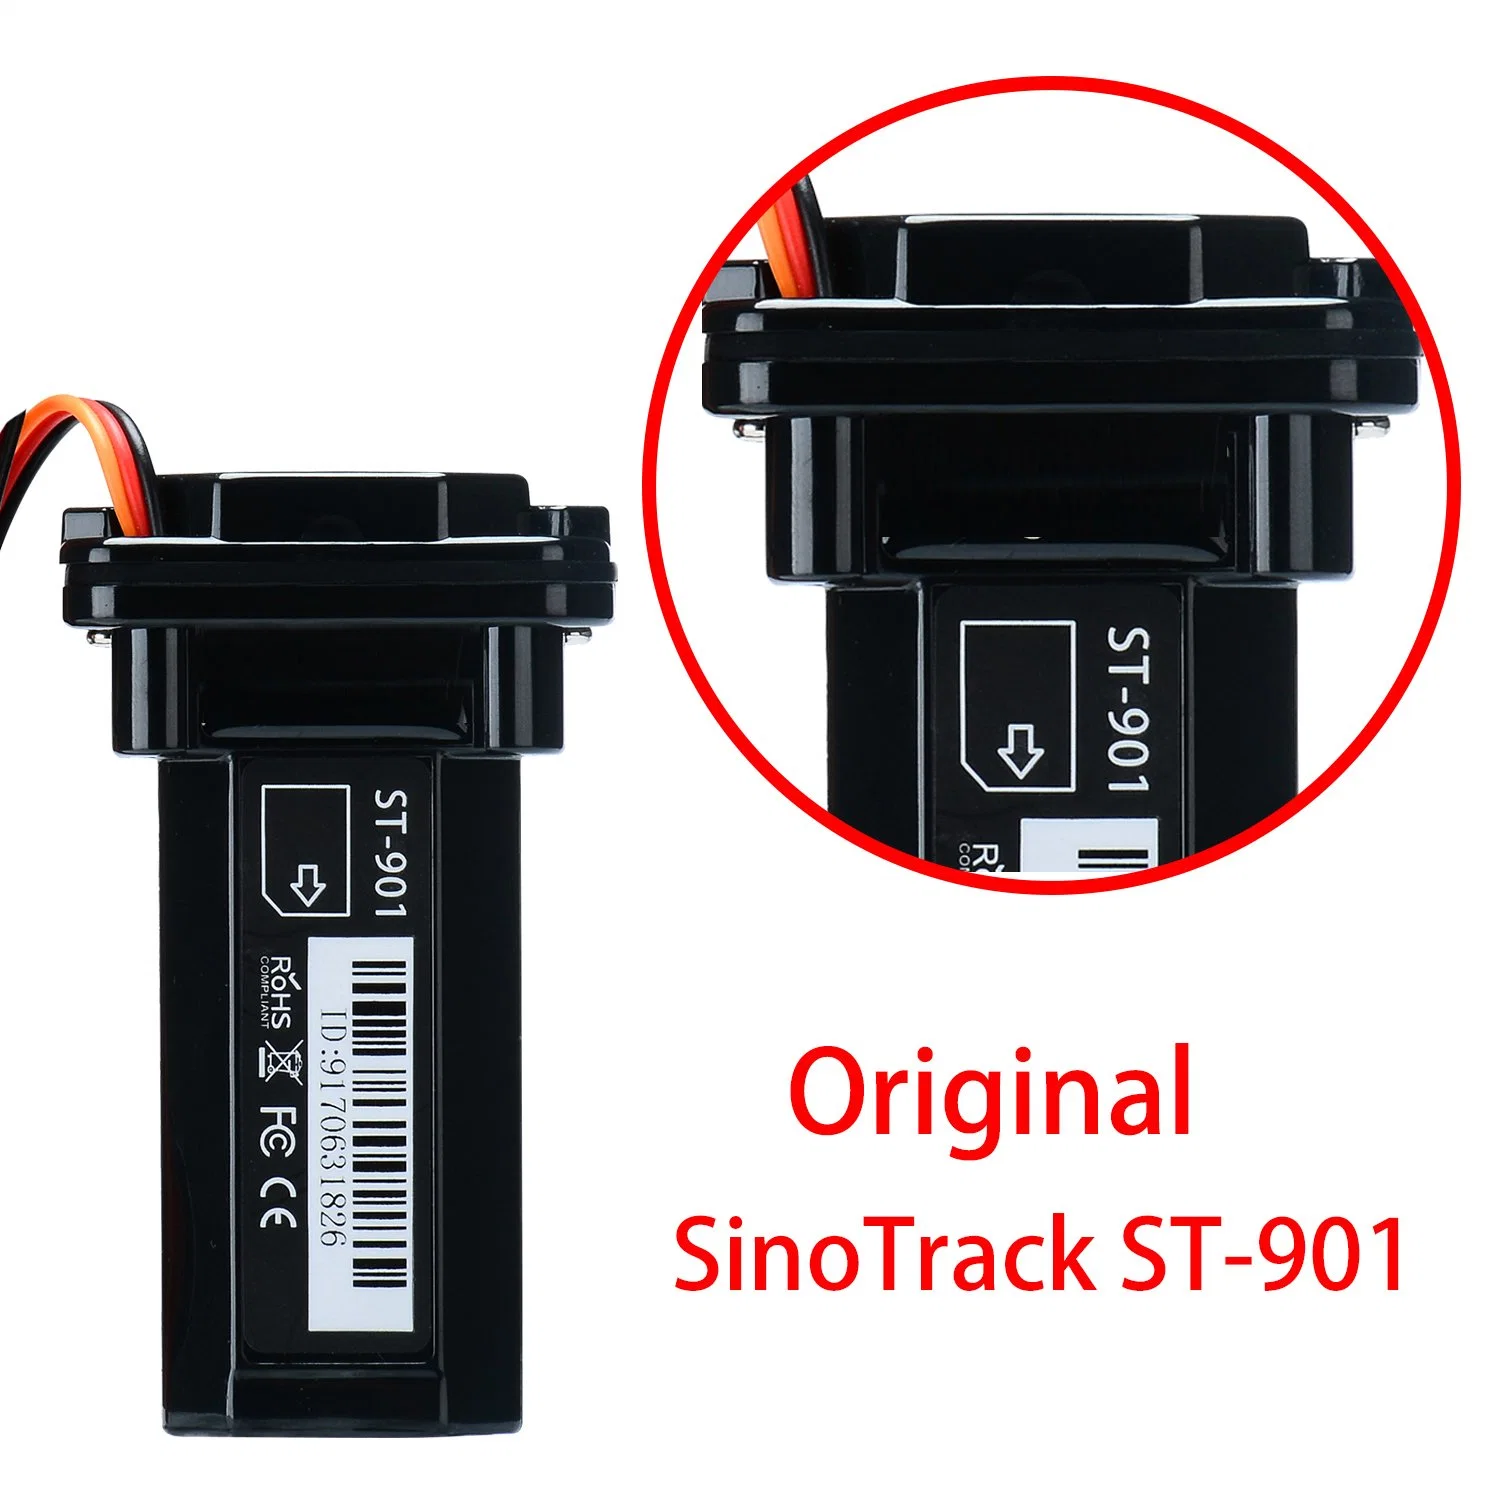 Mini Waterproof Builtin Battery GSM GPS Tracker 3G WCDMA Device for Car Motorcycle Vehicle Remote Control Free Web APP